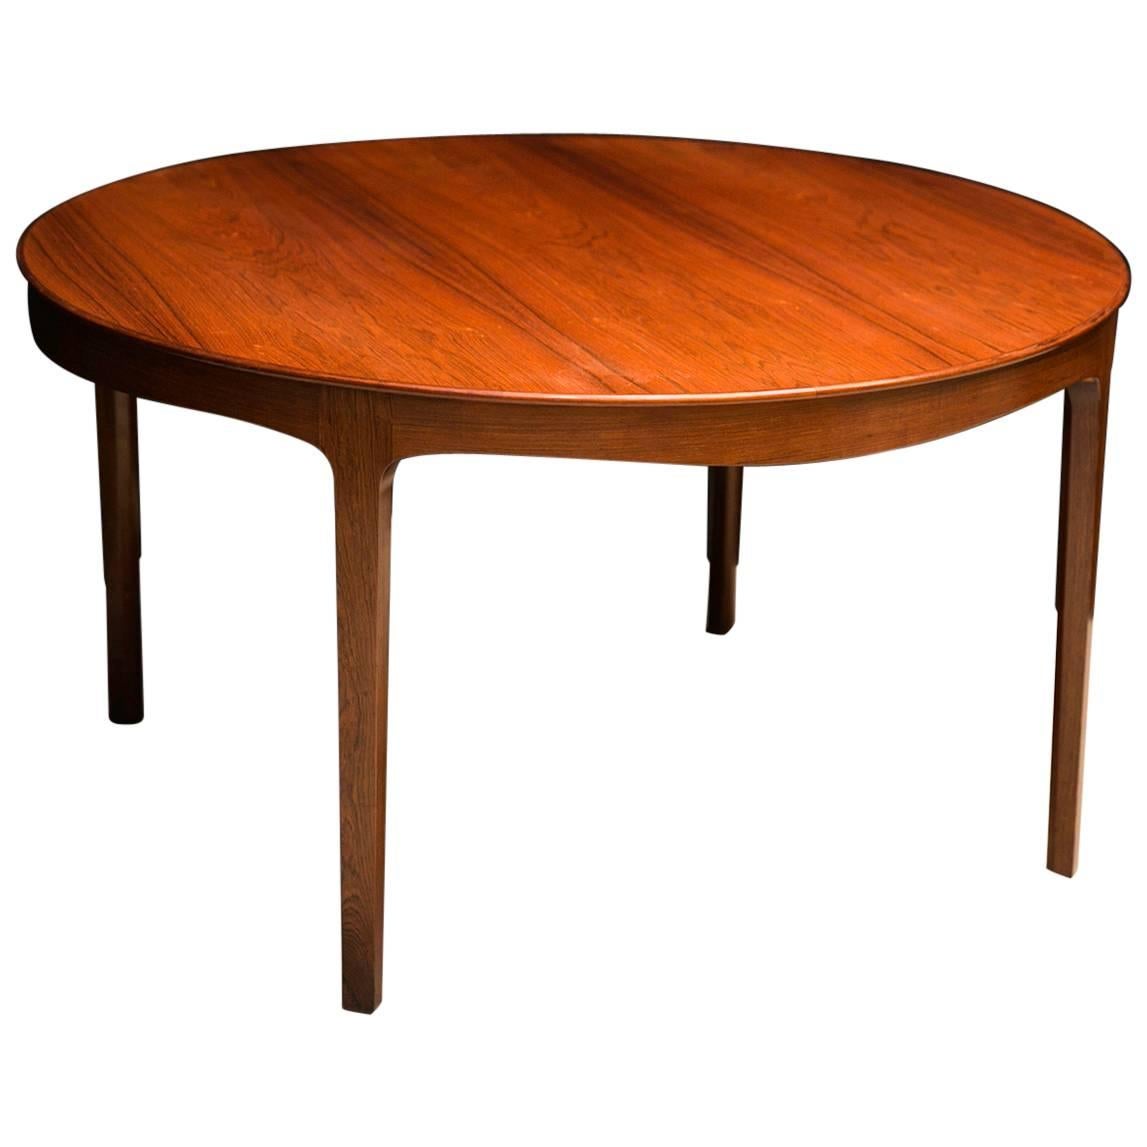 Ole Wanscher's Elegant Brazilian Rosewood Circular Sofa Table with Curved Apron 